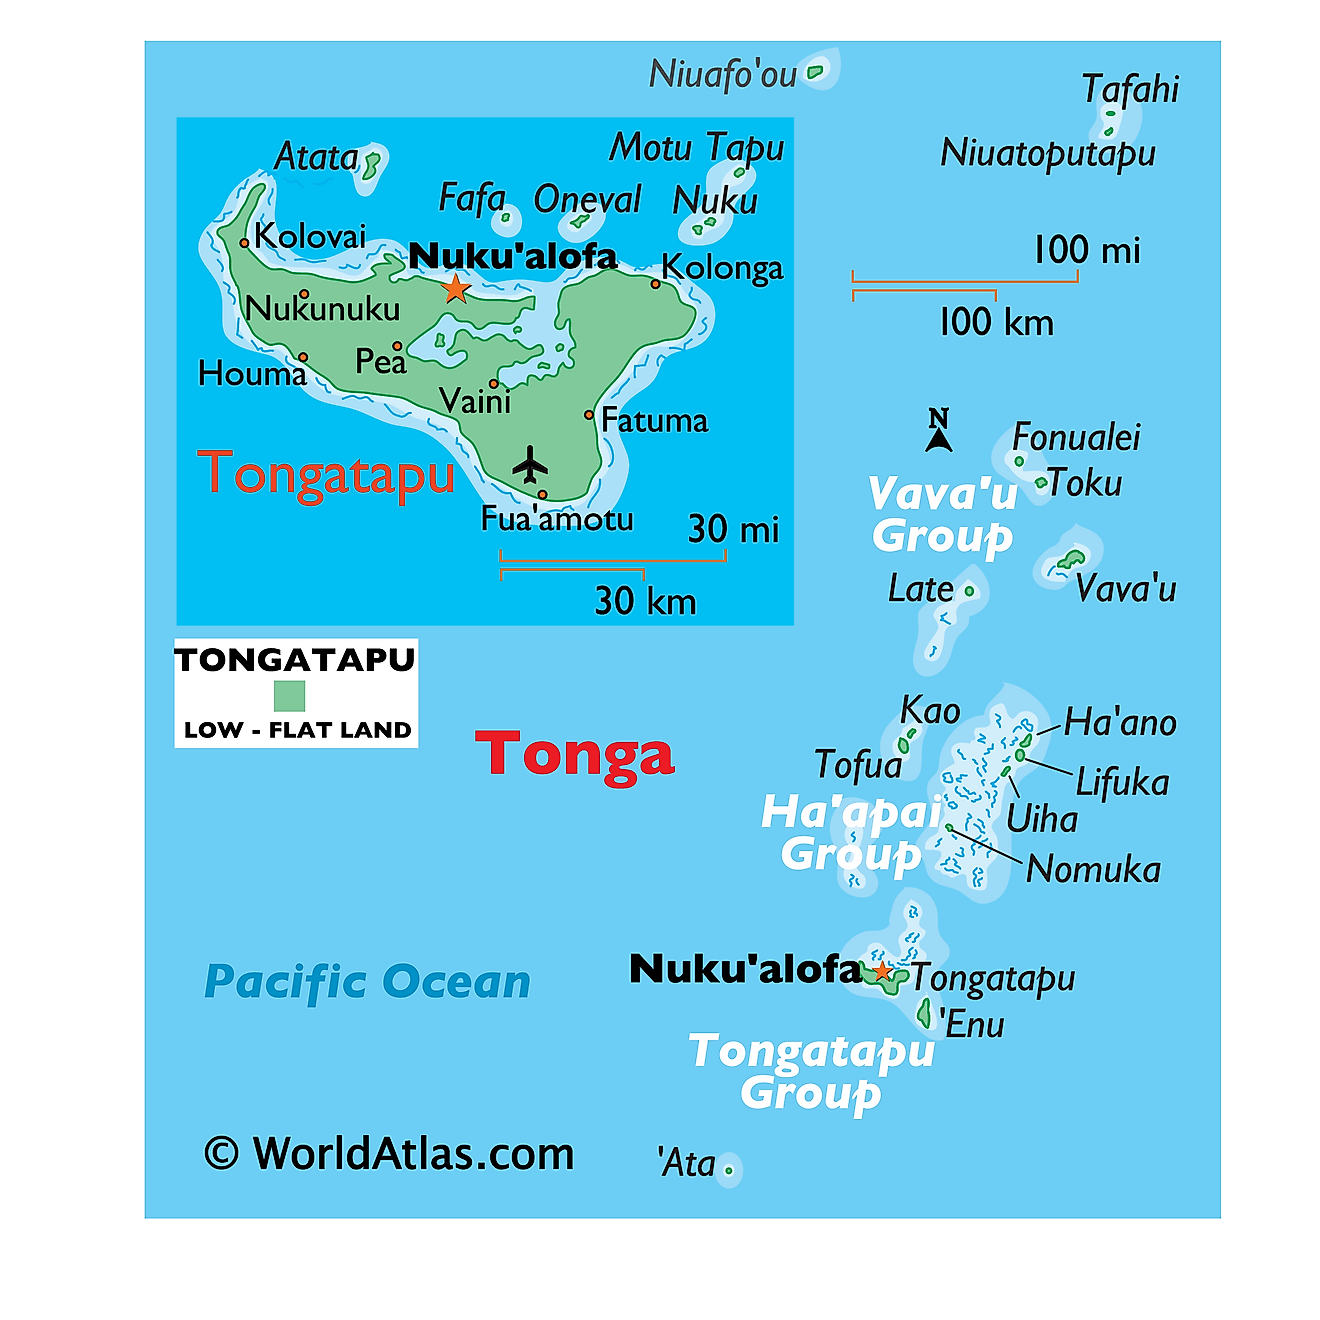 Physical Map of Tonga showing islands, relief, important settlements, etc.